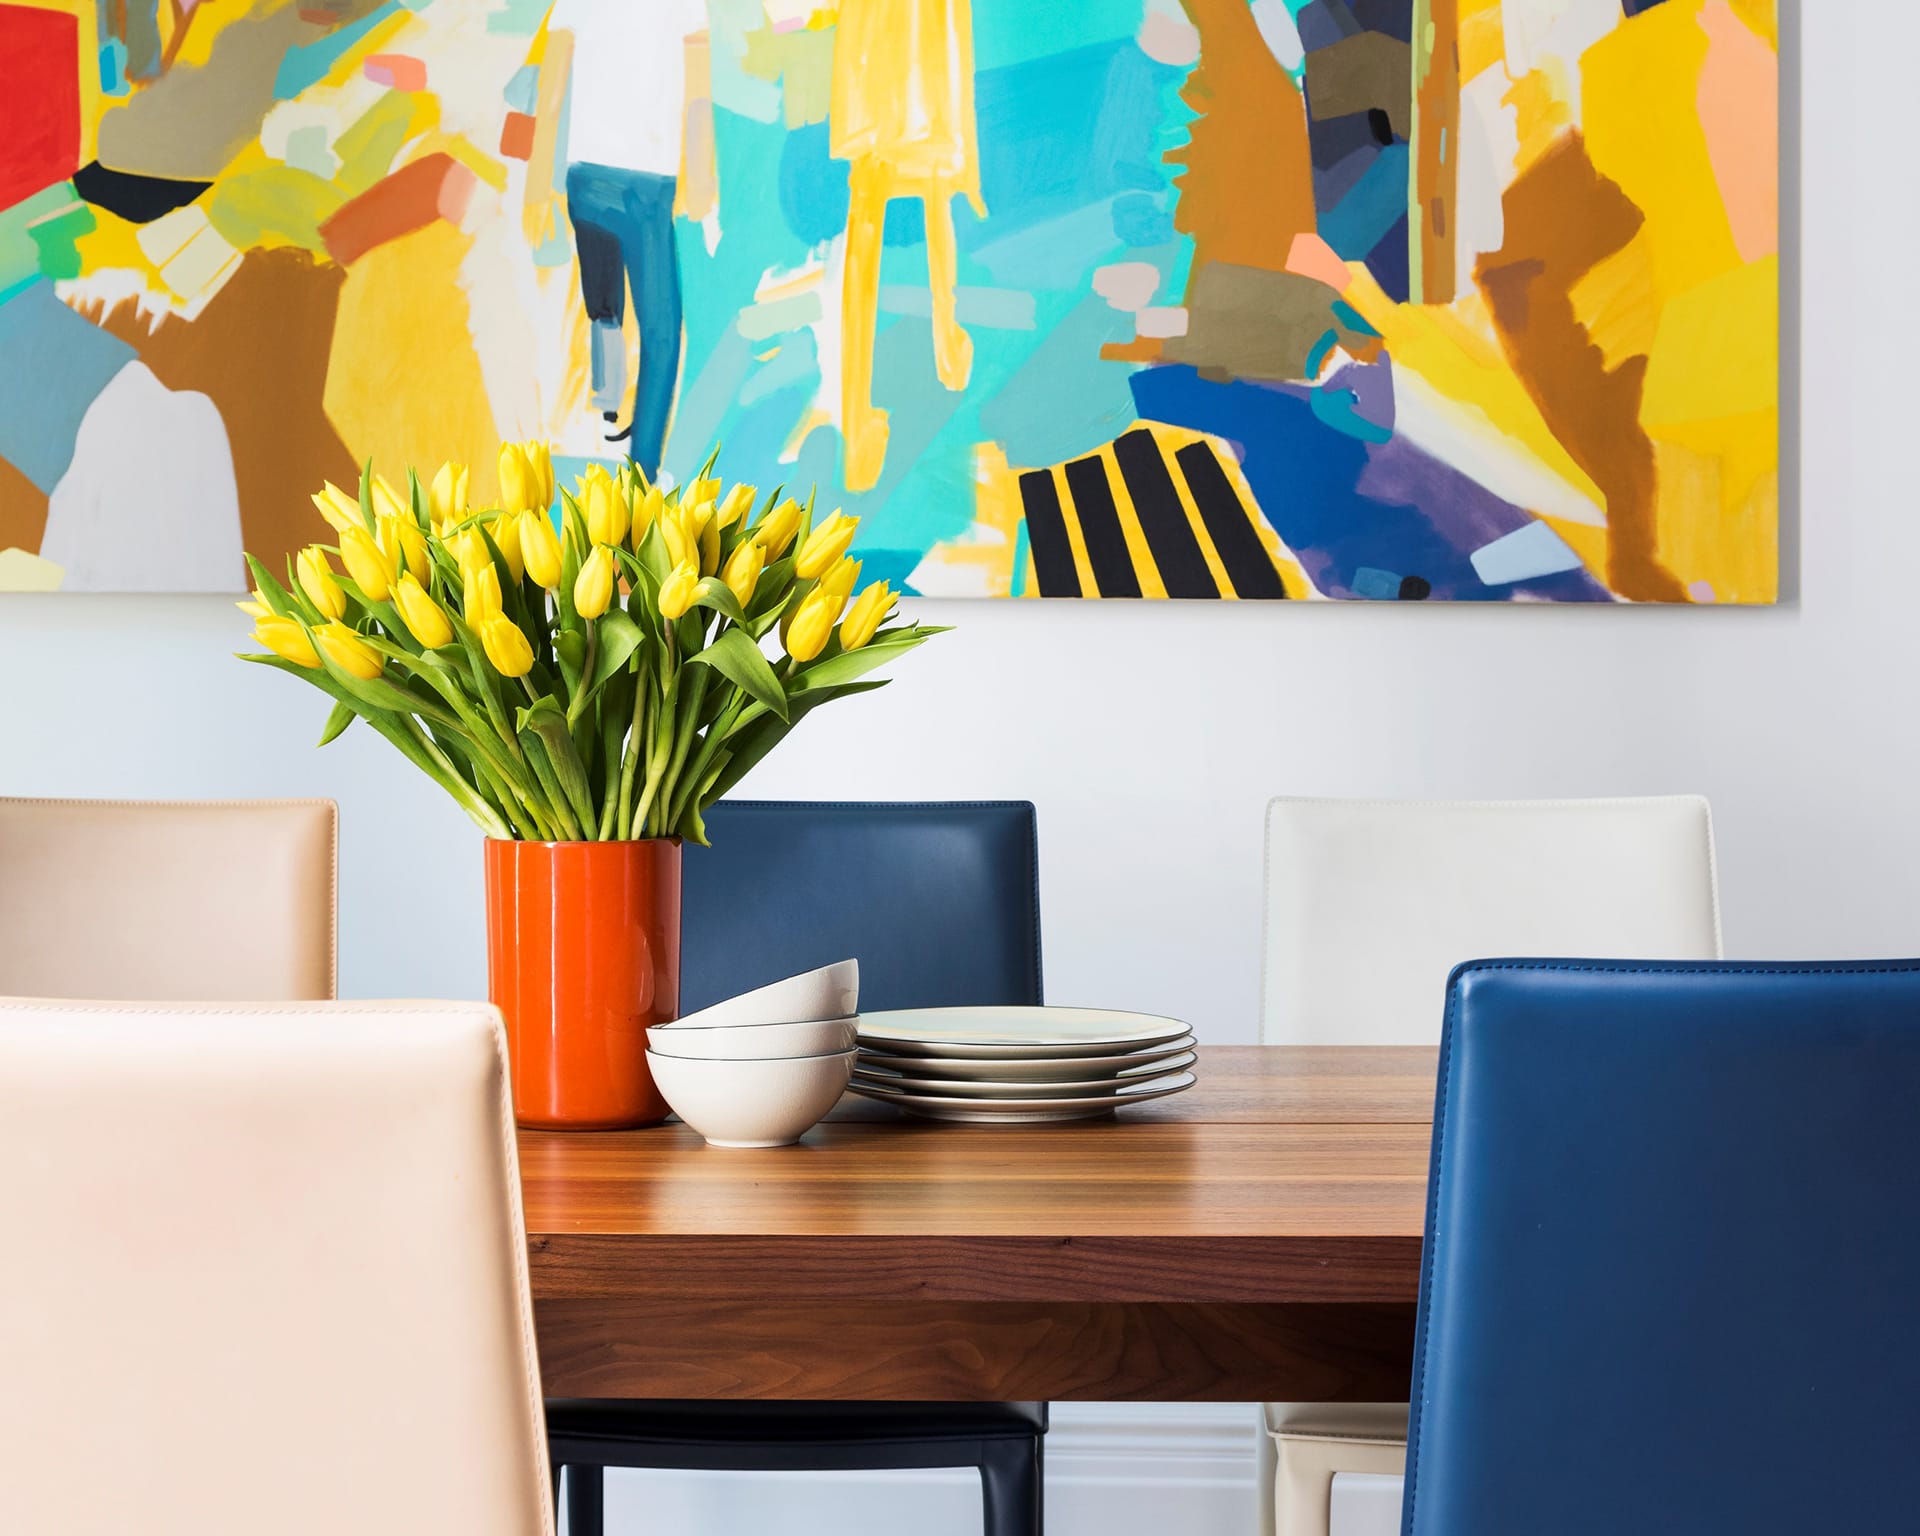 Dining room with mixed colored leather chairs, a wood table, and a large colorful painting on the wall.